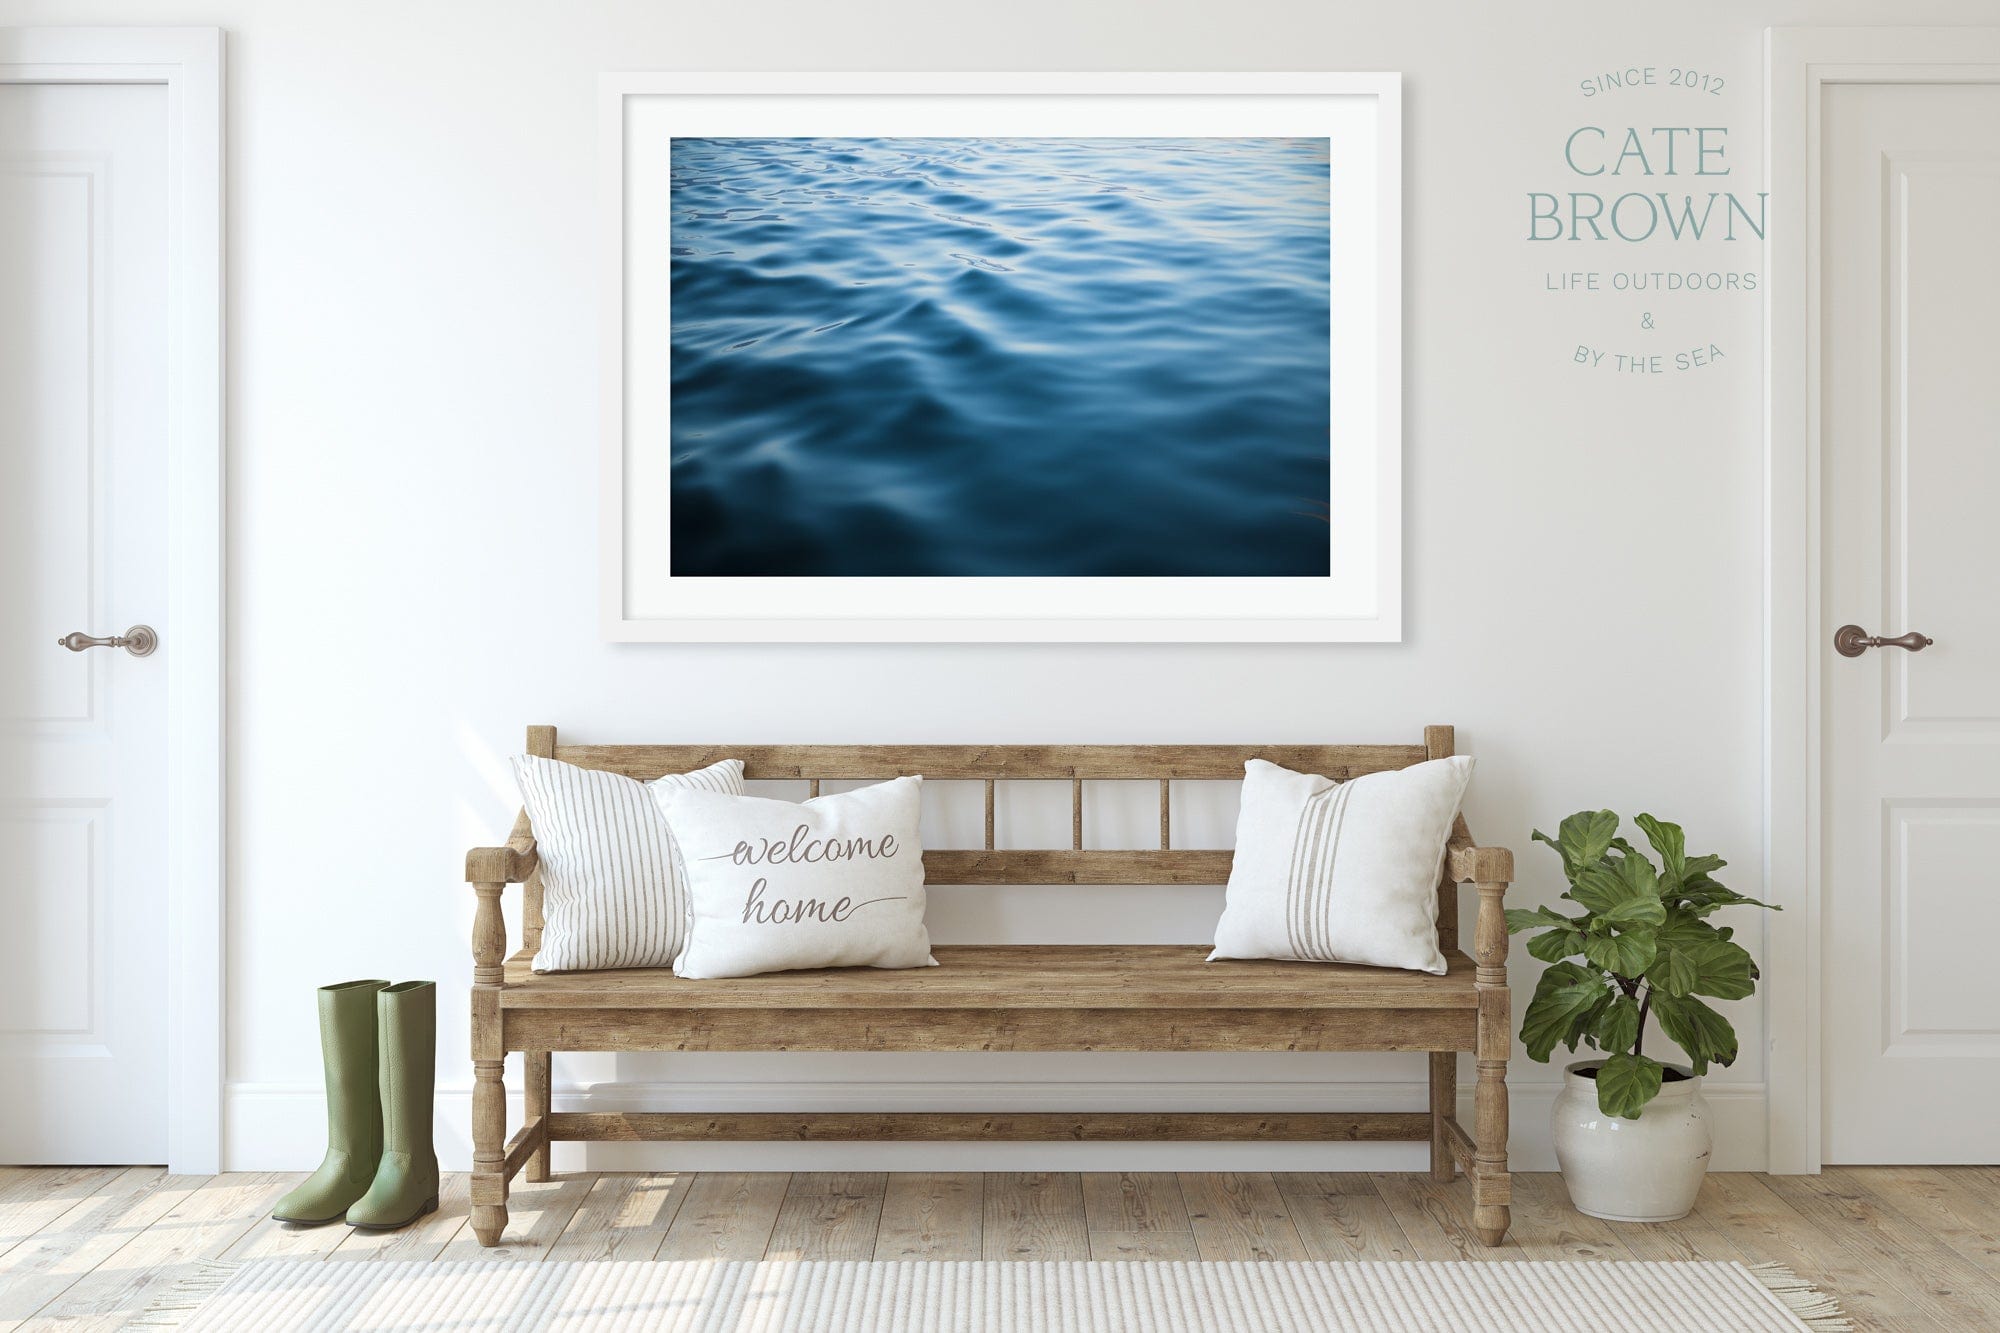 Cate Brown Photo Fine Art Print / 8"x12" / None (Print Only) Narragansett Waters #4  //  Ocean Photography Made to Order Ocean Fine Art